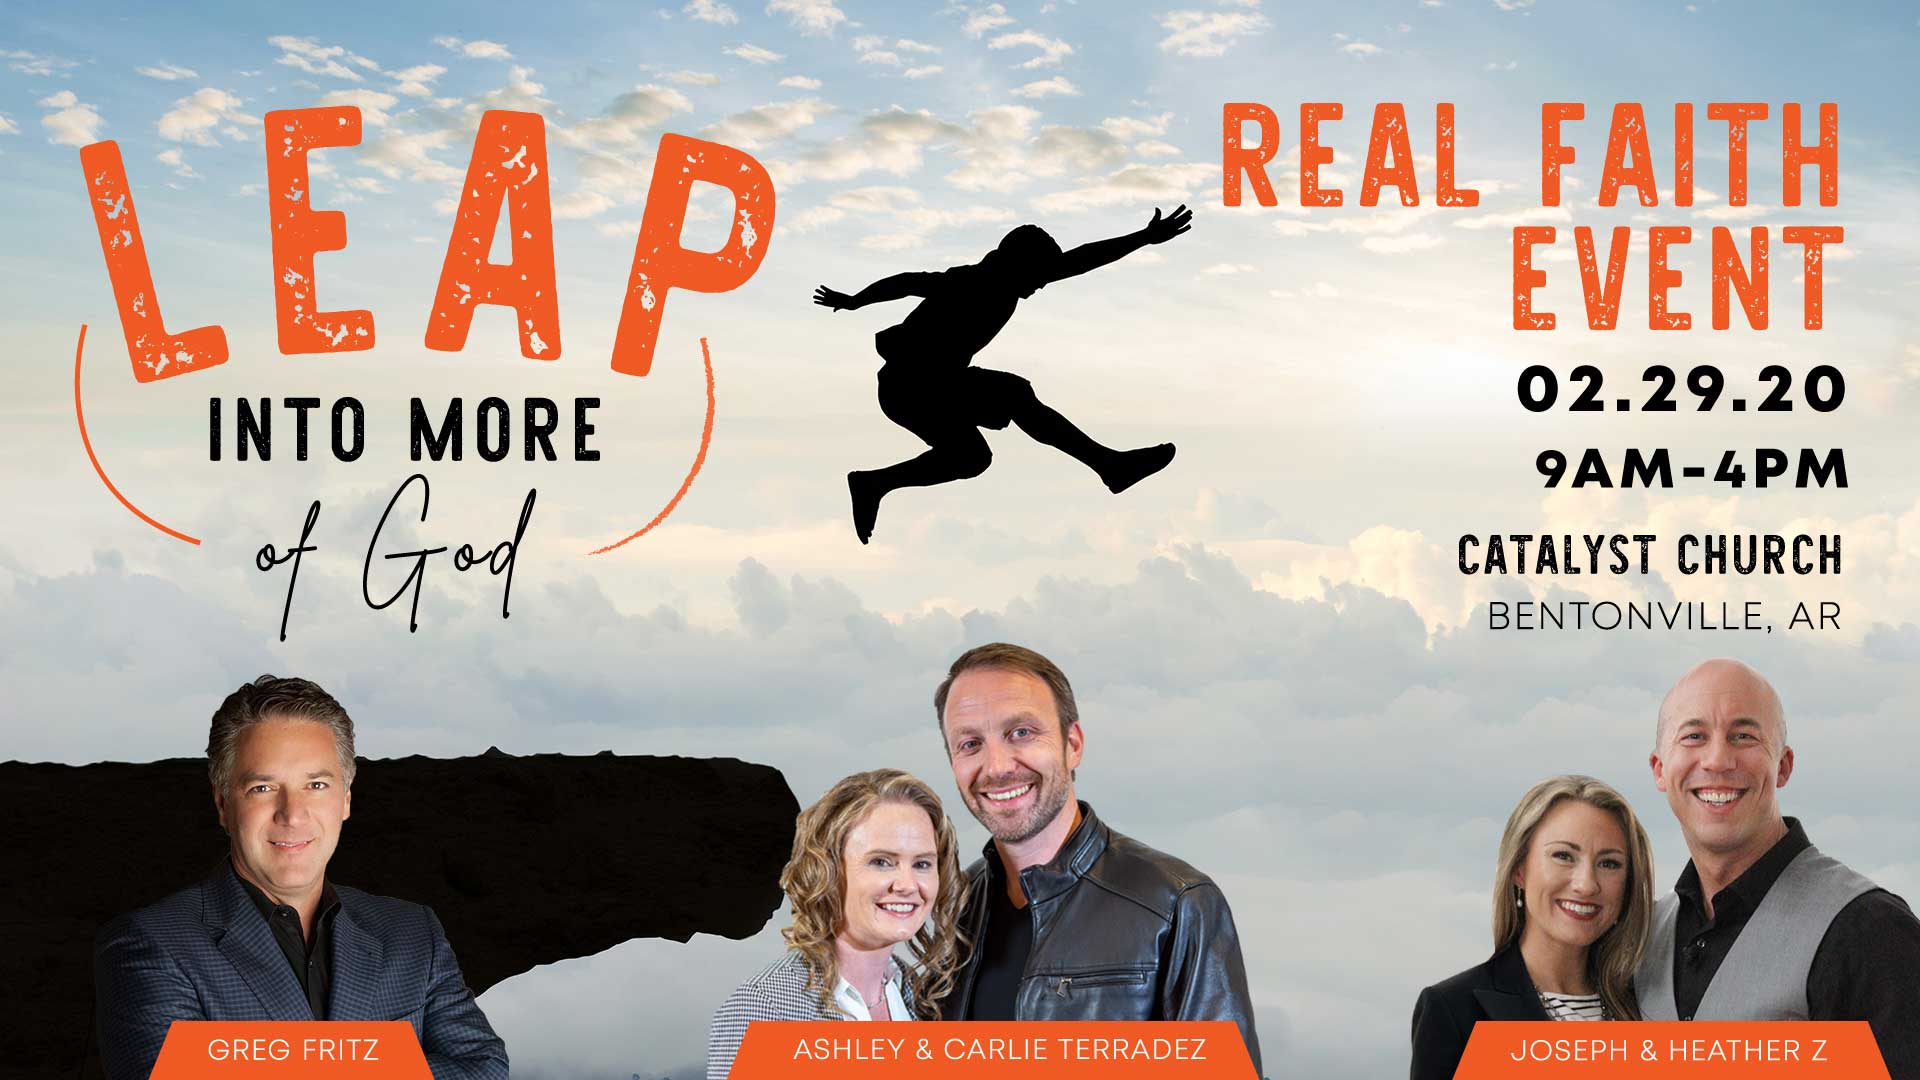 Real Faith Event 2020 - Leap into more of God